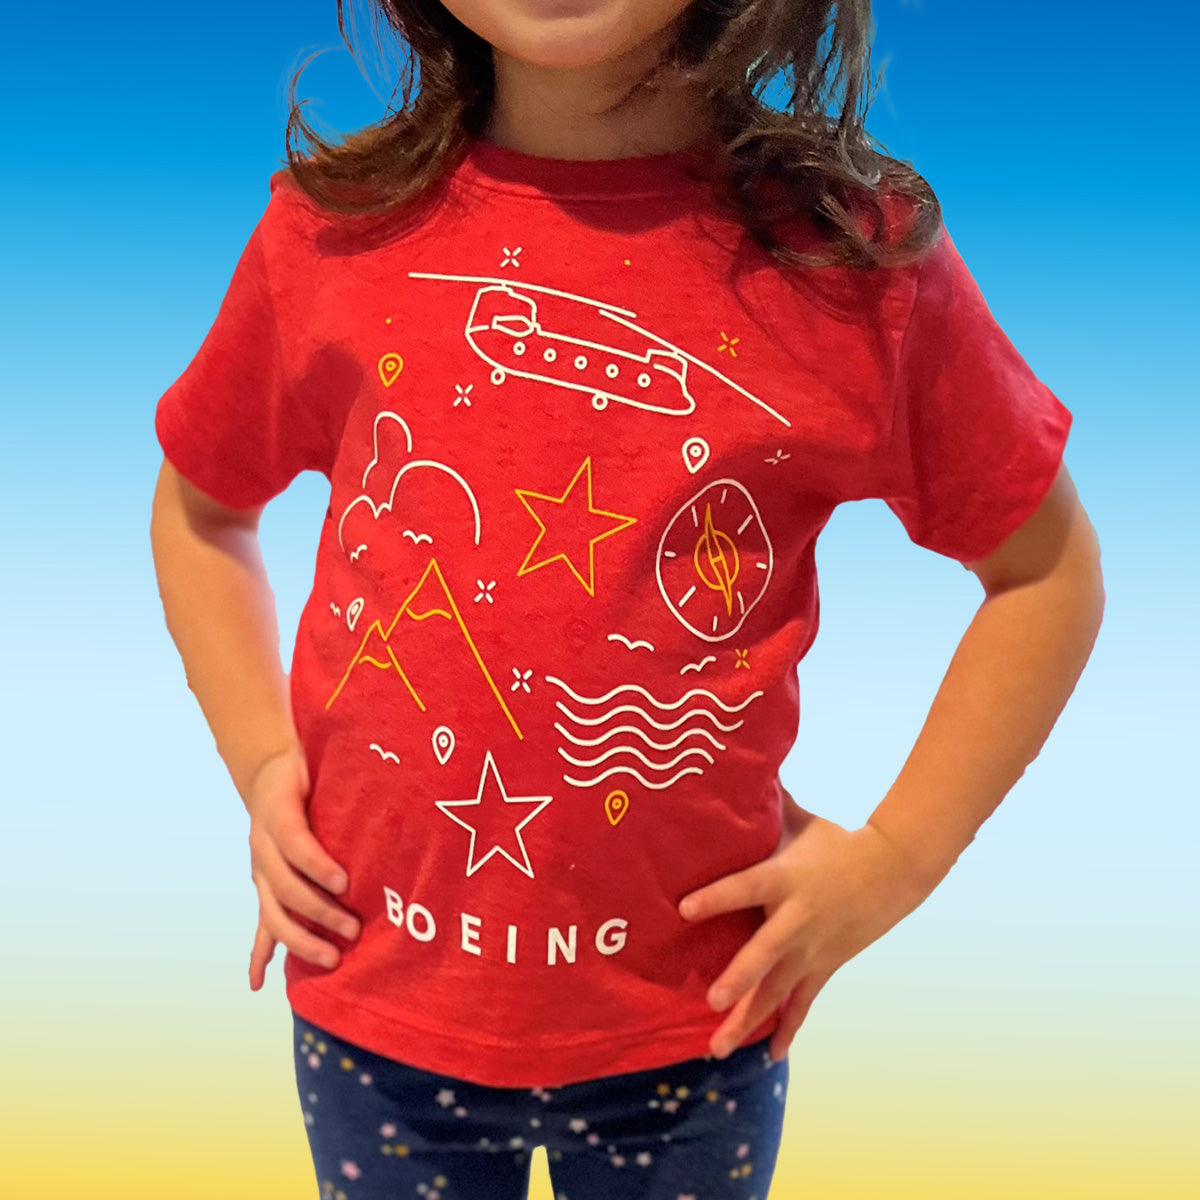 Lifestyle of Boeing Kids Graphic Tee in Red on Small Mosaic Tile in Fan Favorites